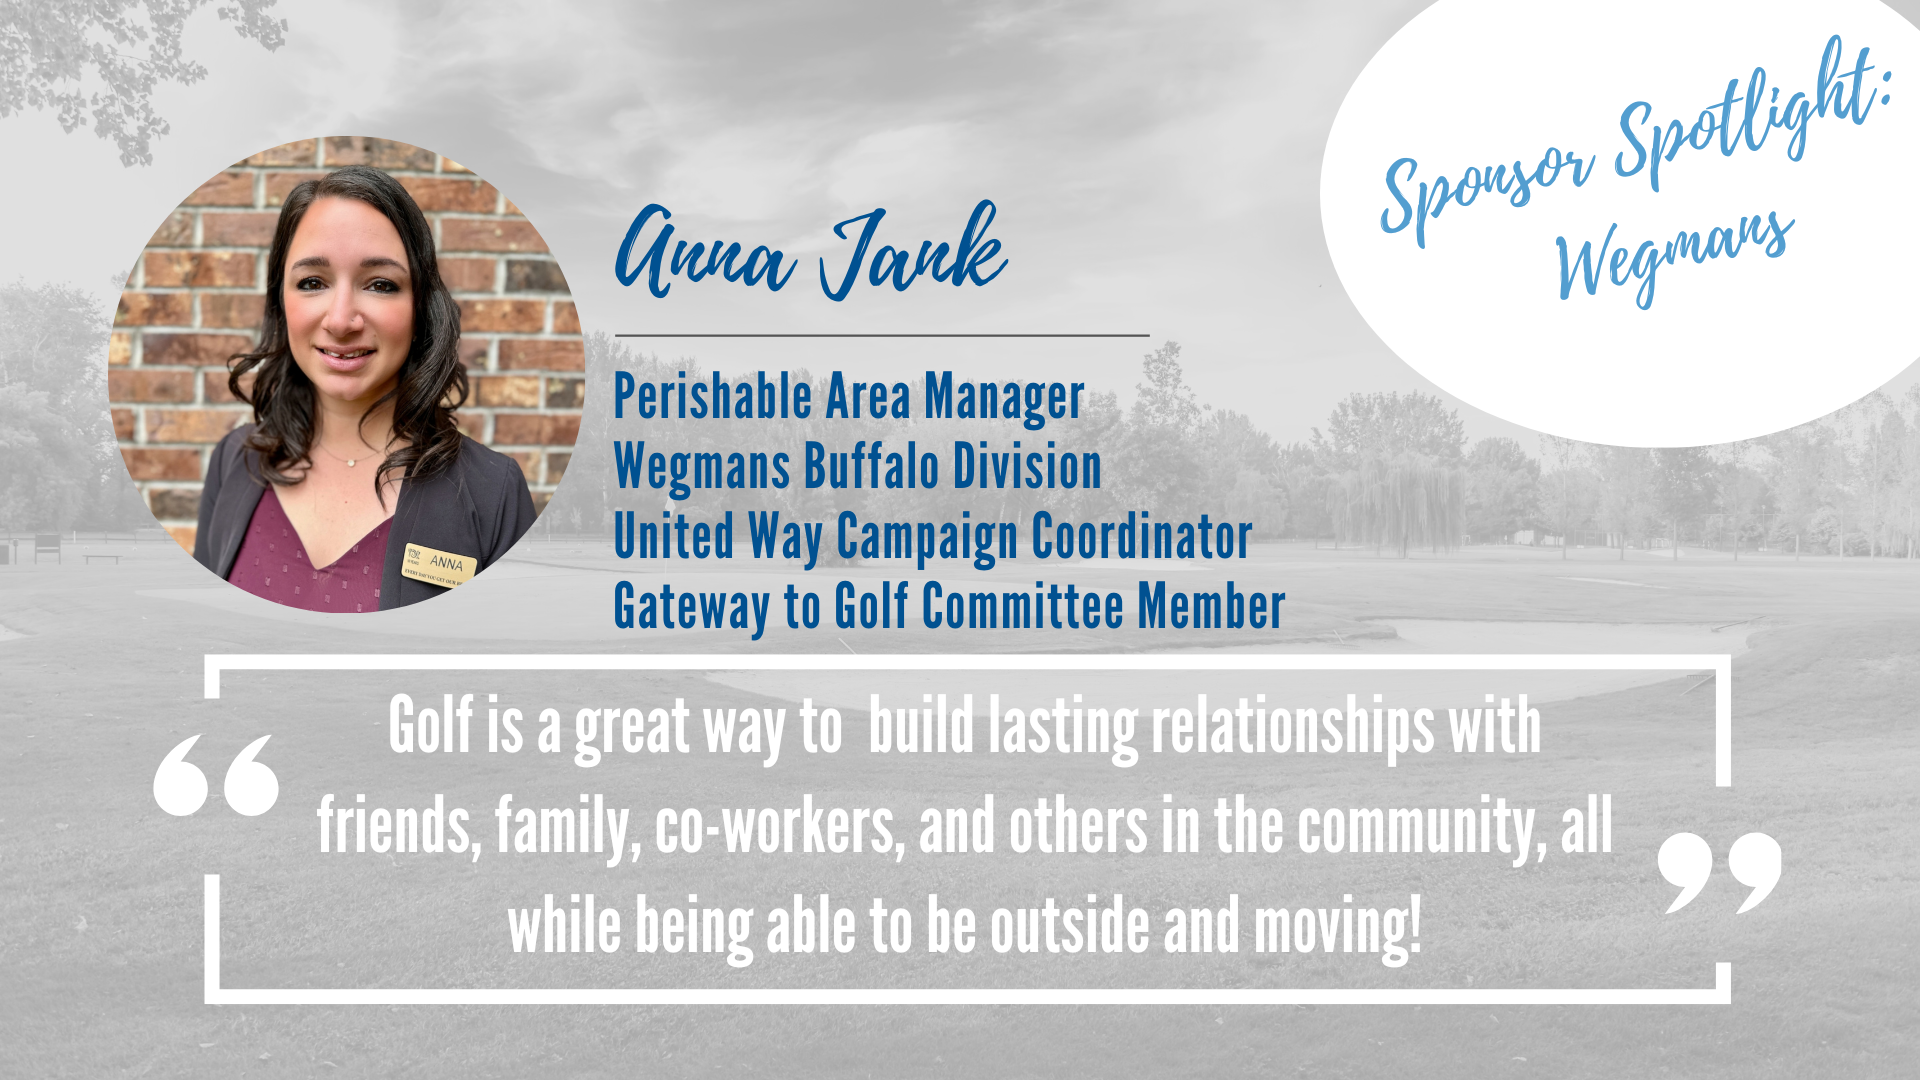 Image of Anna Jank Perishable Area Manager Wegmans Buffalo Division with a quote "Golf is a great way to build lasting relationships with friends, family, co-workers, and others in the community, all while being able to be outside and moving!"